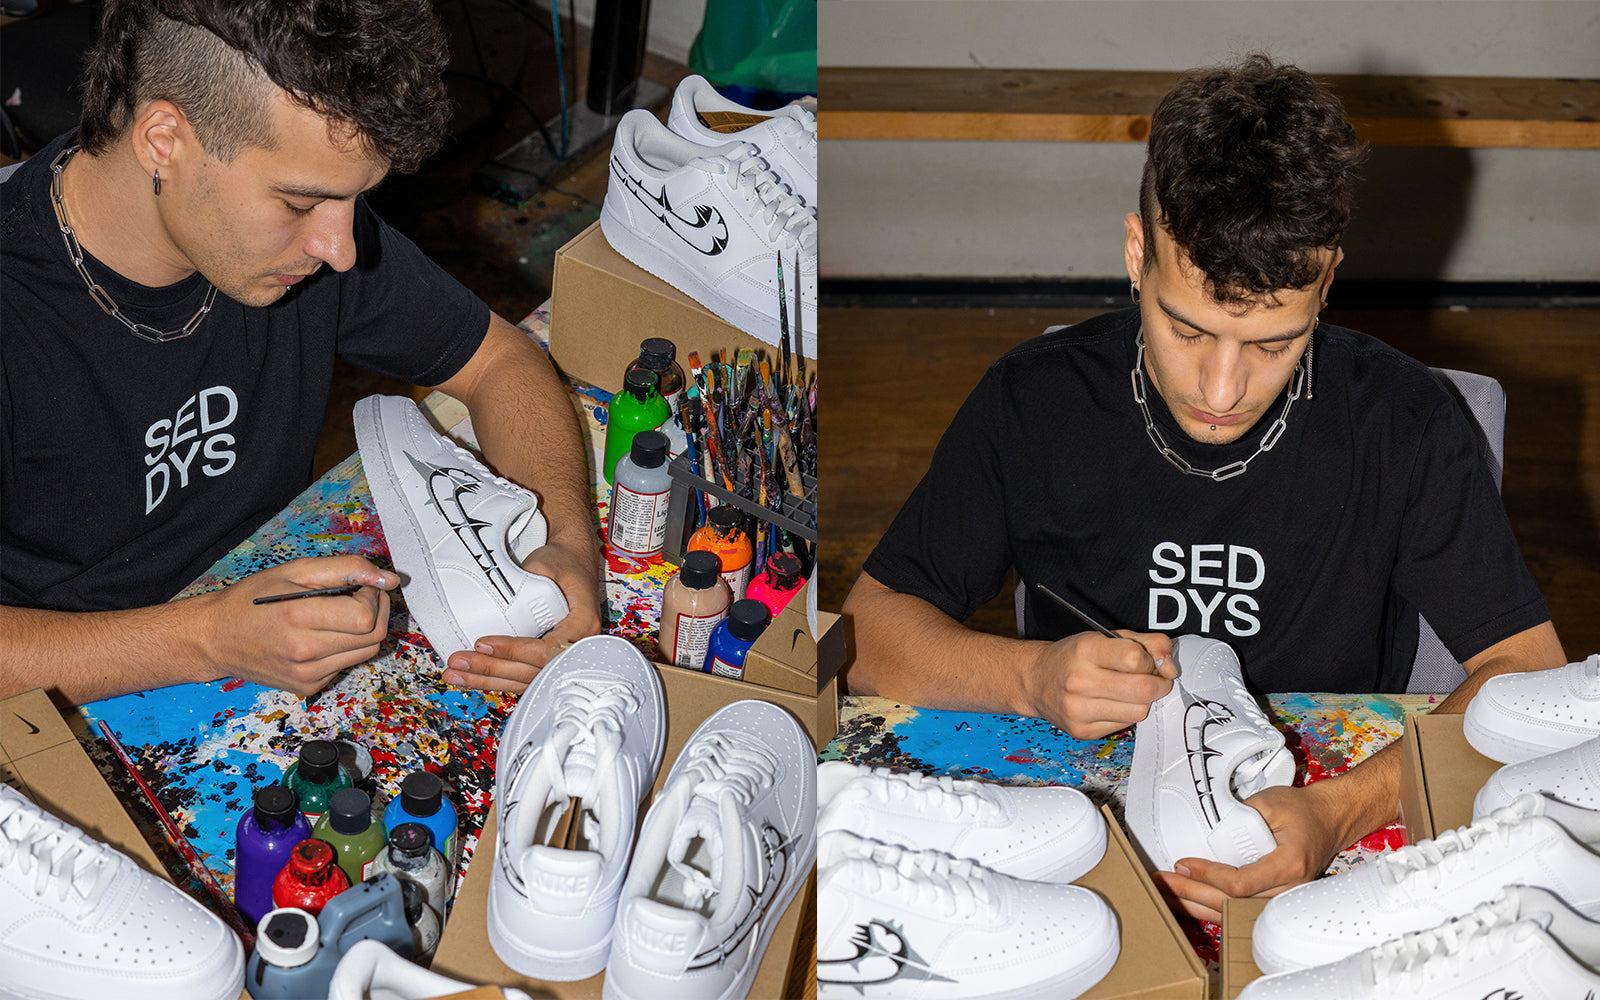 Artist from the SEDDYS creative team customizes a sneaker by drawing